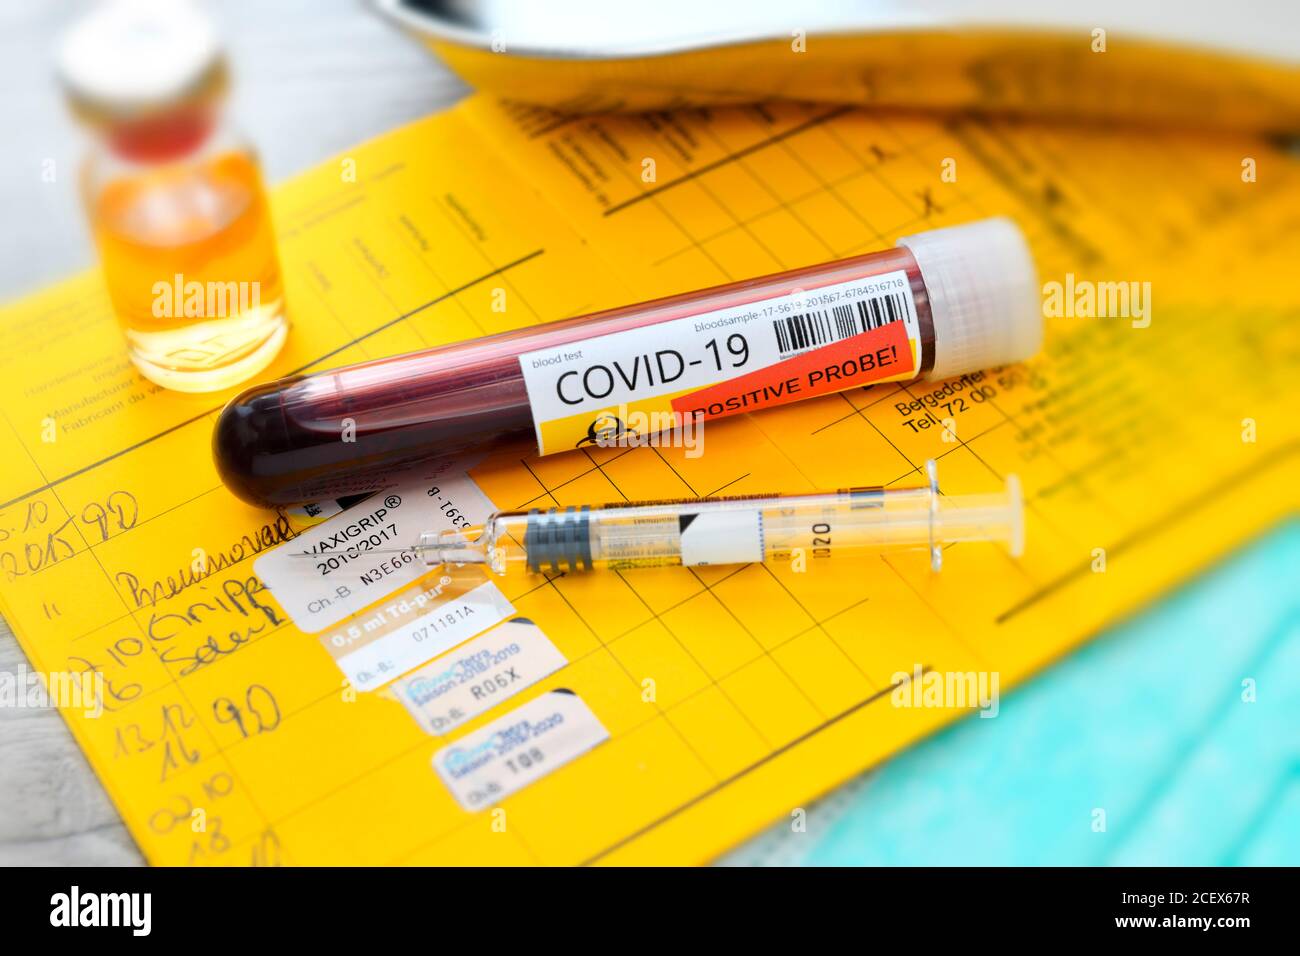 COVID-19 blood collection tube and syringe on vaccination card, corona vaccination Stock Photo